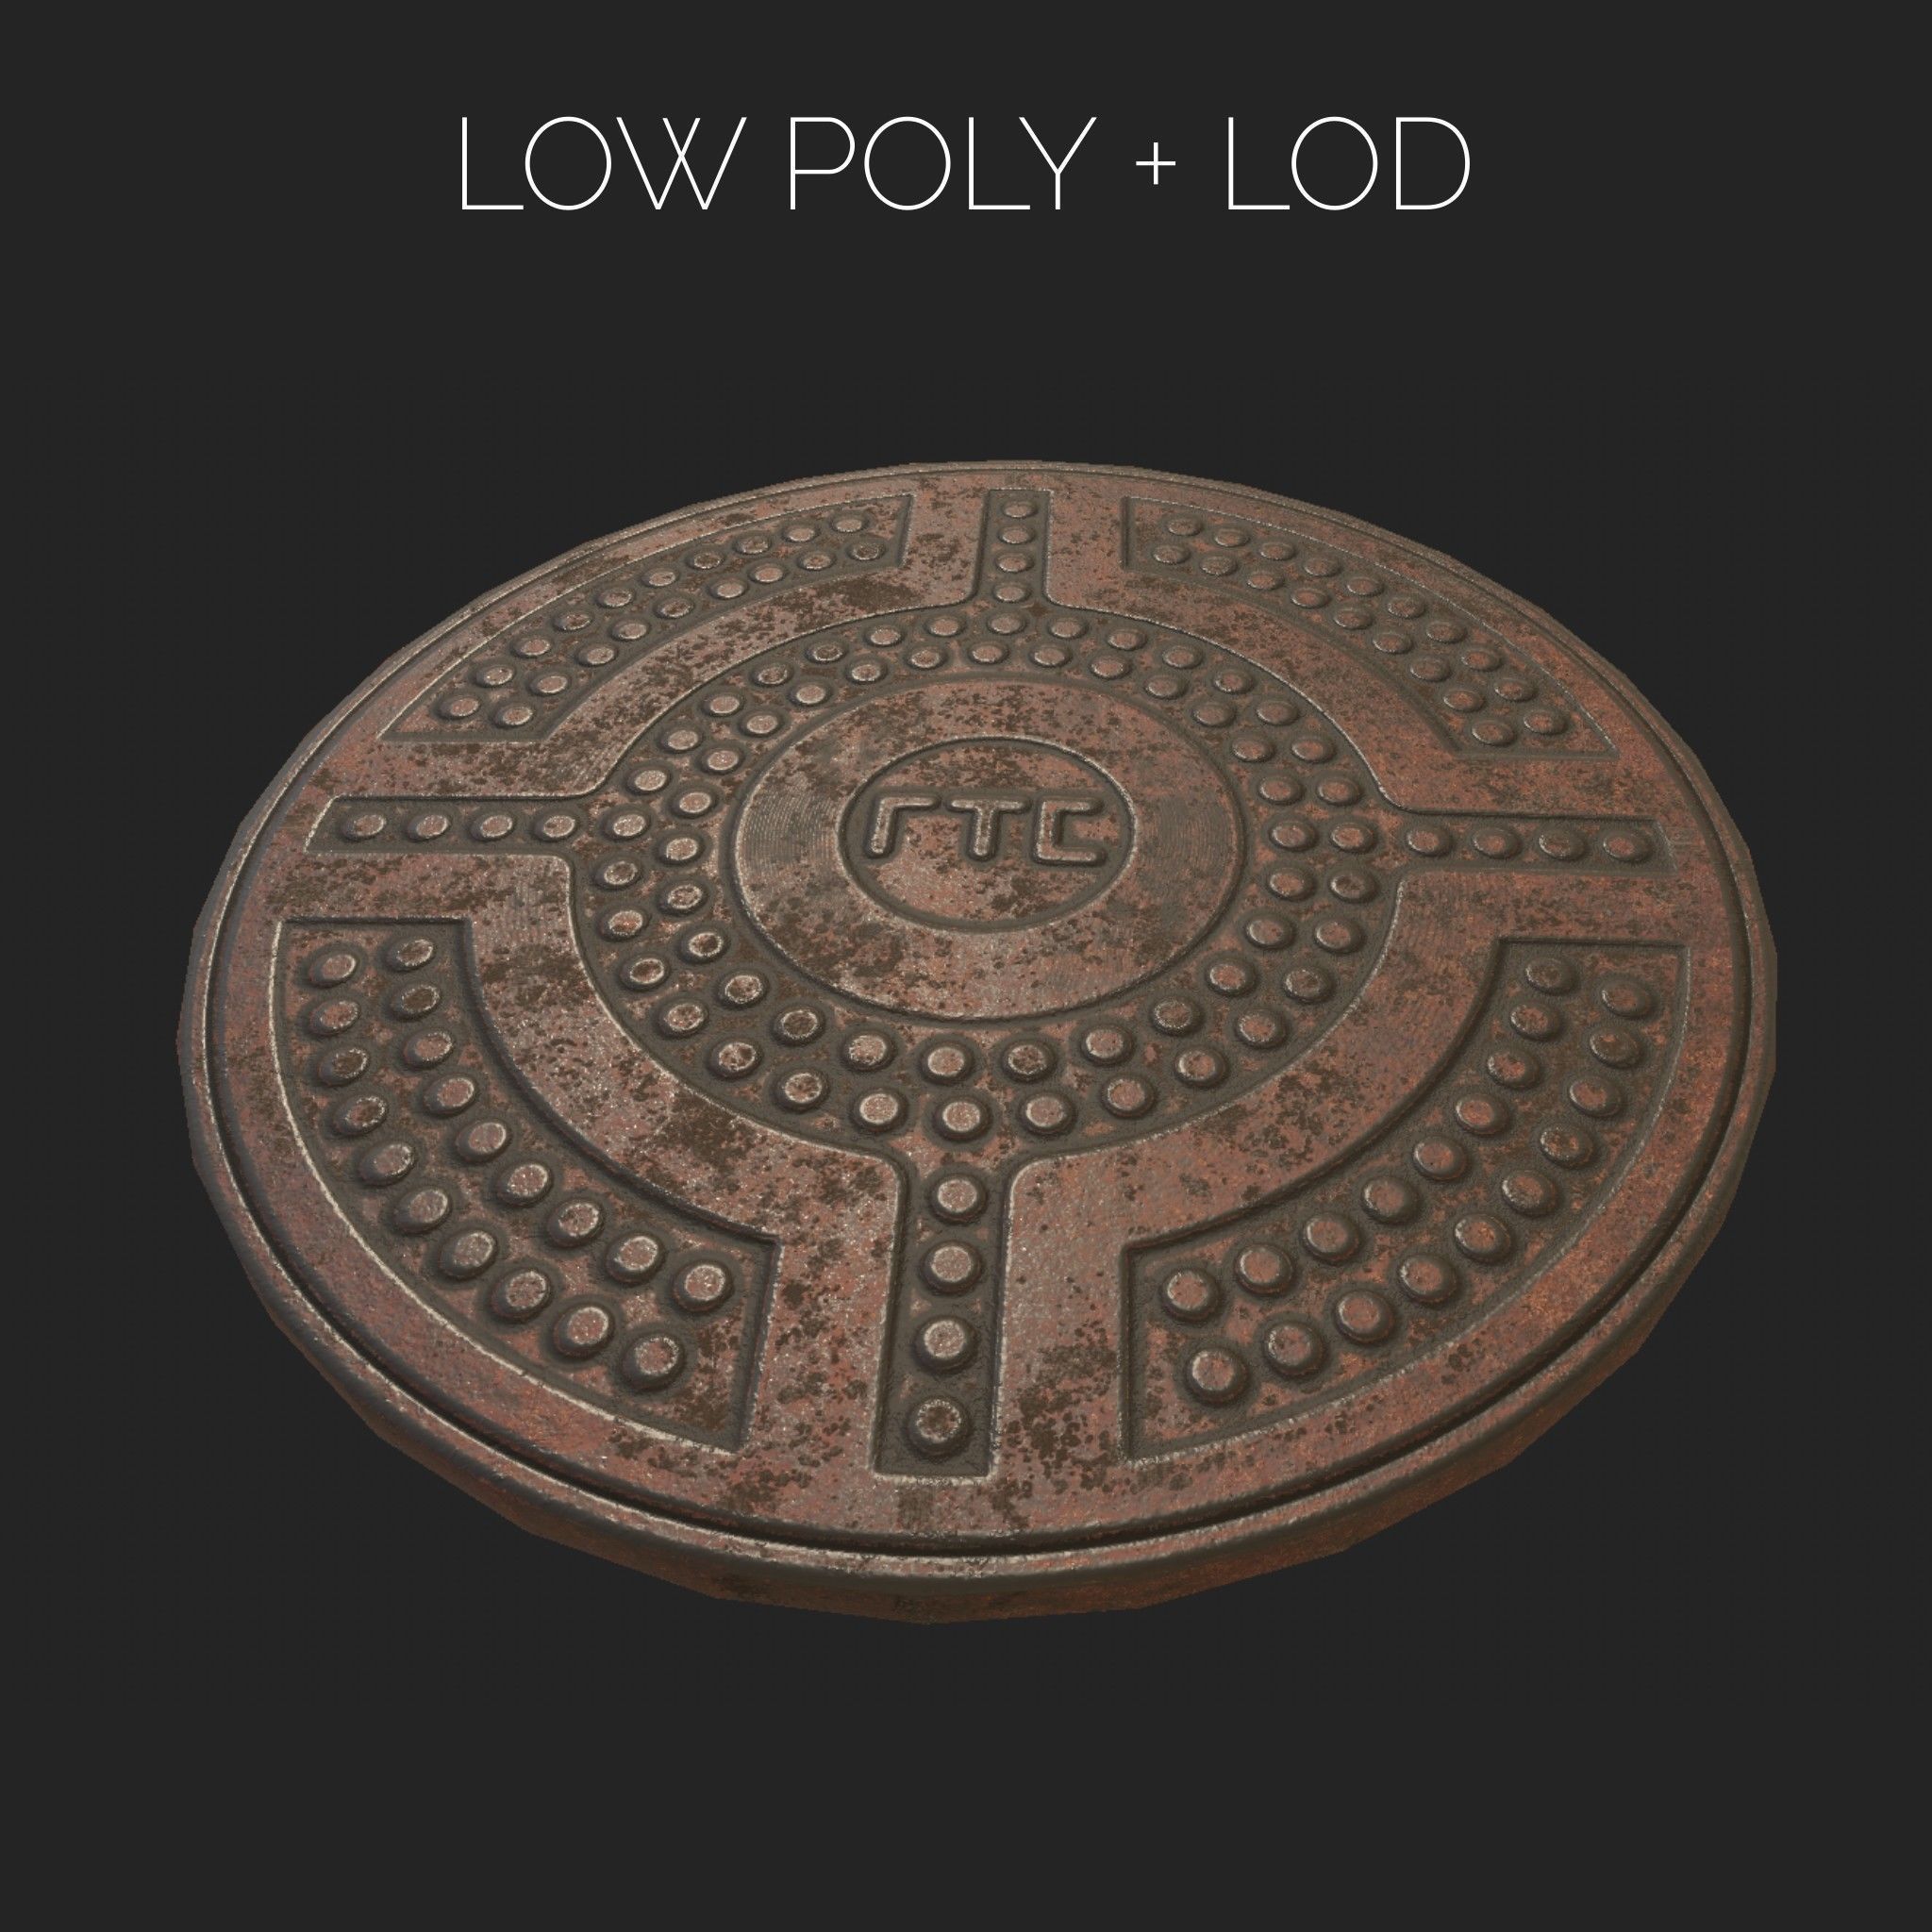 Russian sewer lid - 1 3D model | CGTrader